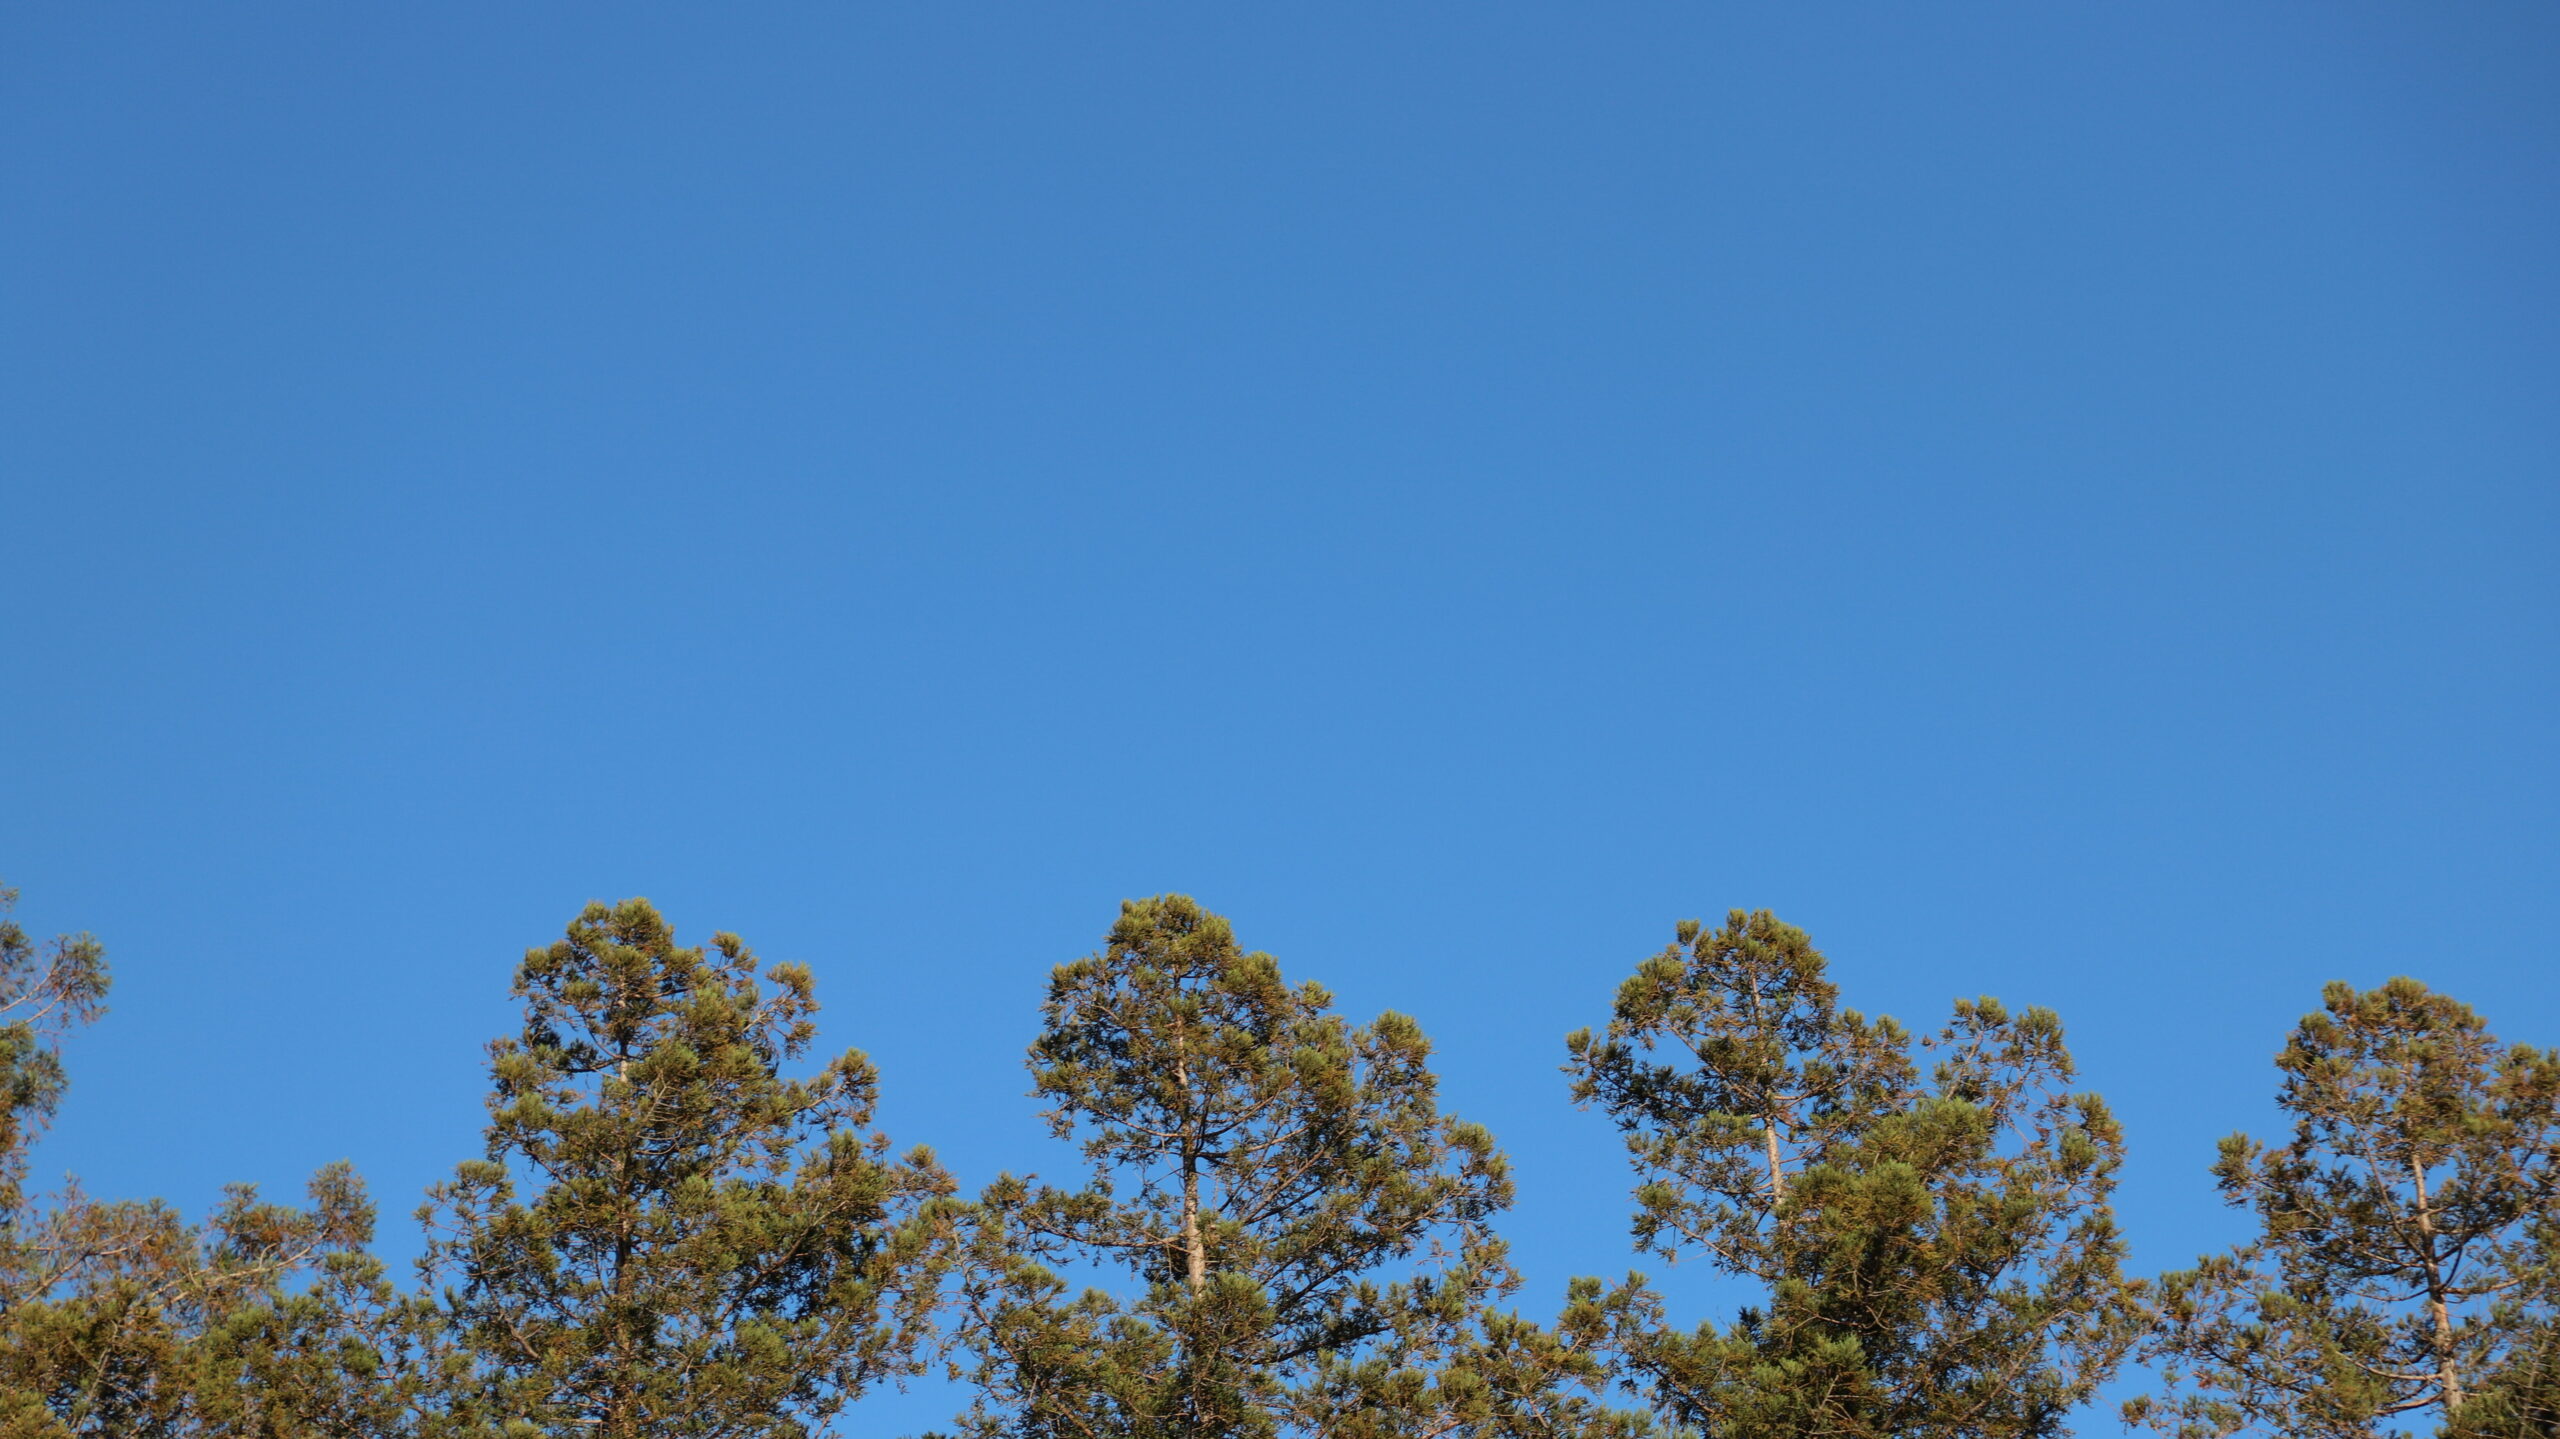 Green treetops over a bright blue sky